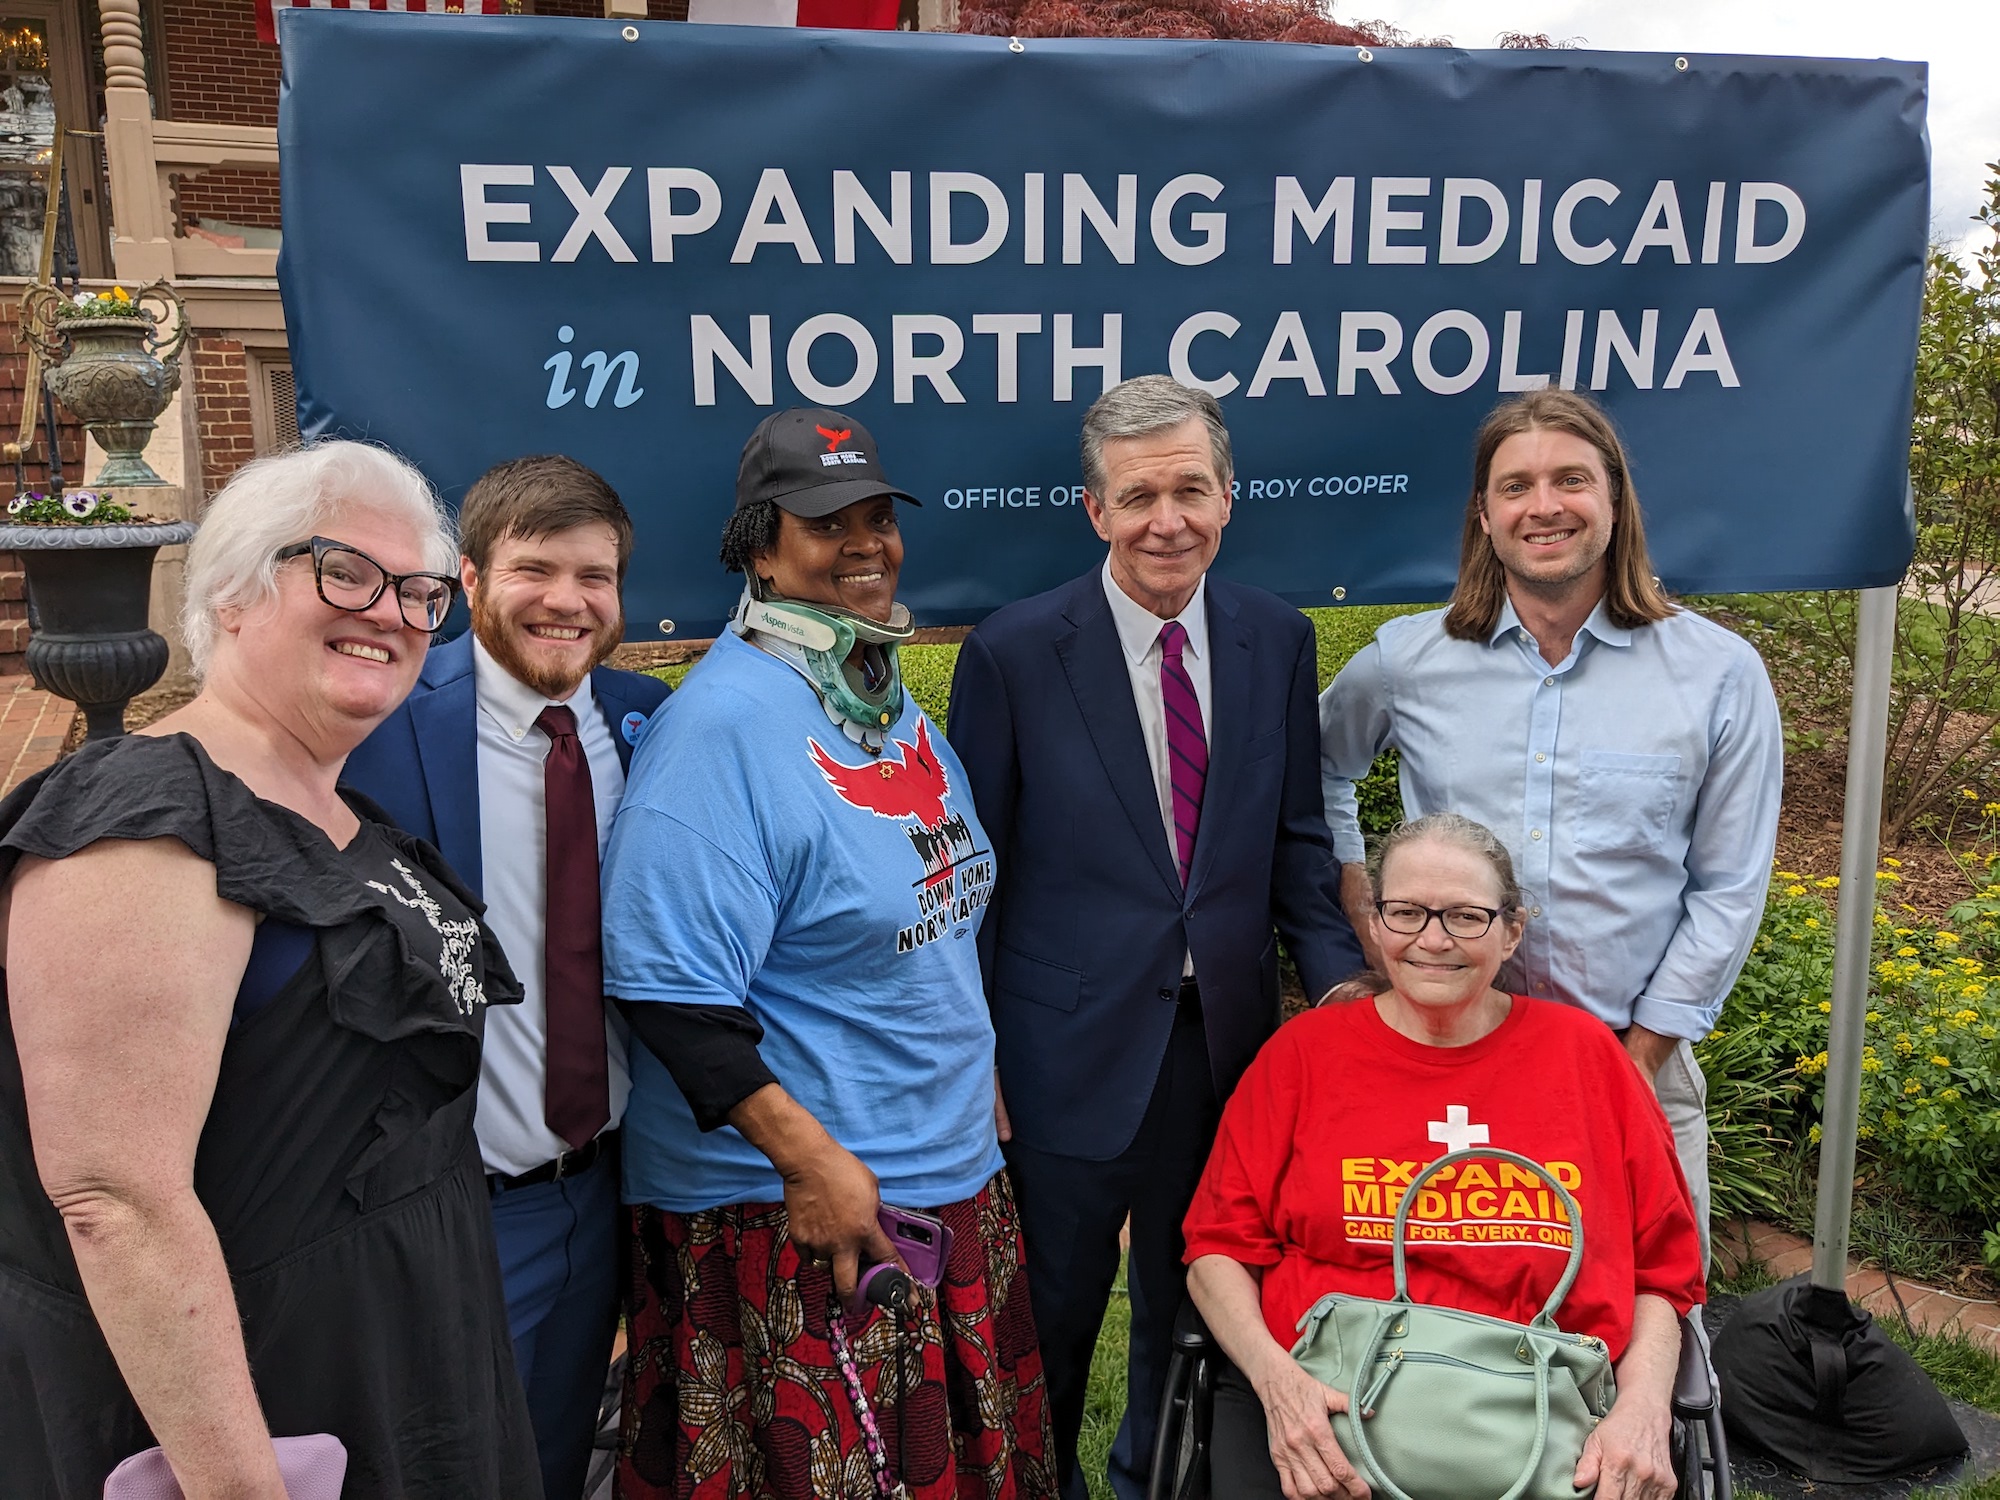 Members of Down Home NC celebrating with Governor Roy Cooper after the successful passage of Medicaid expansion in North Carolina